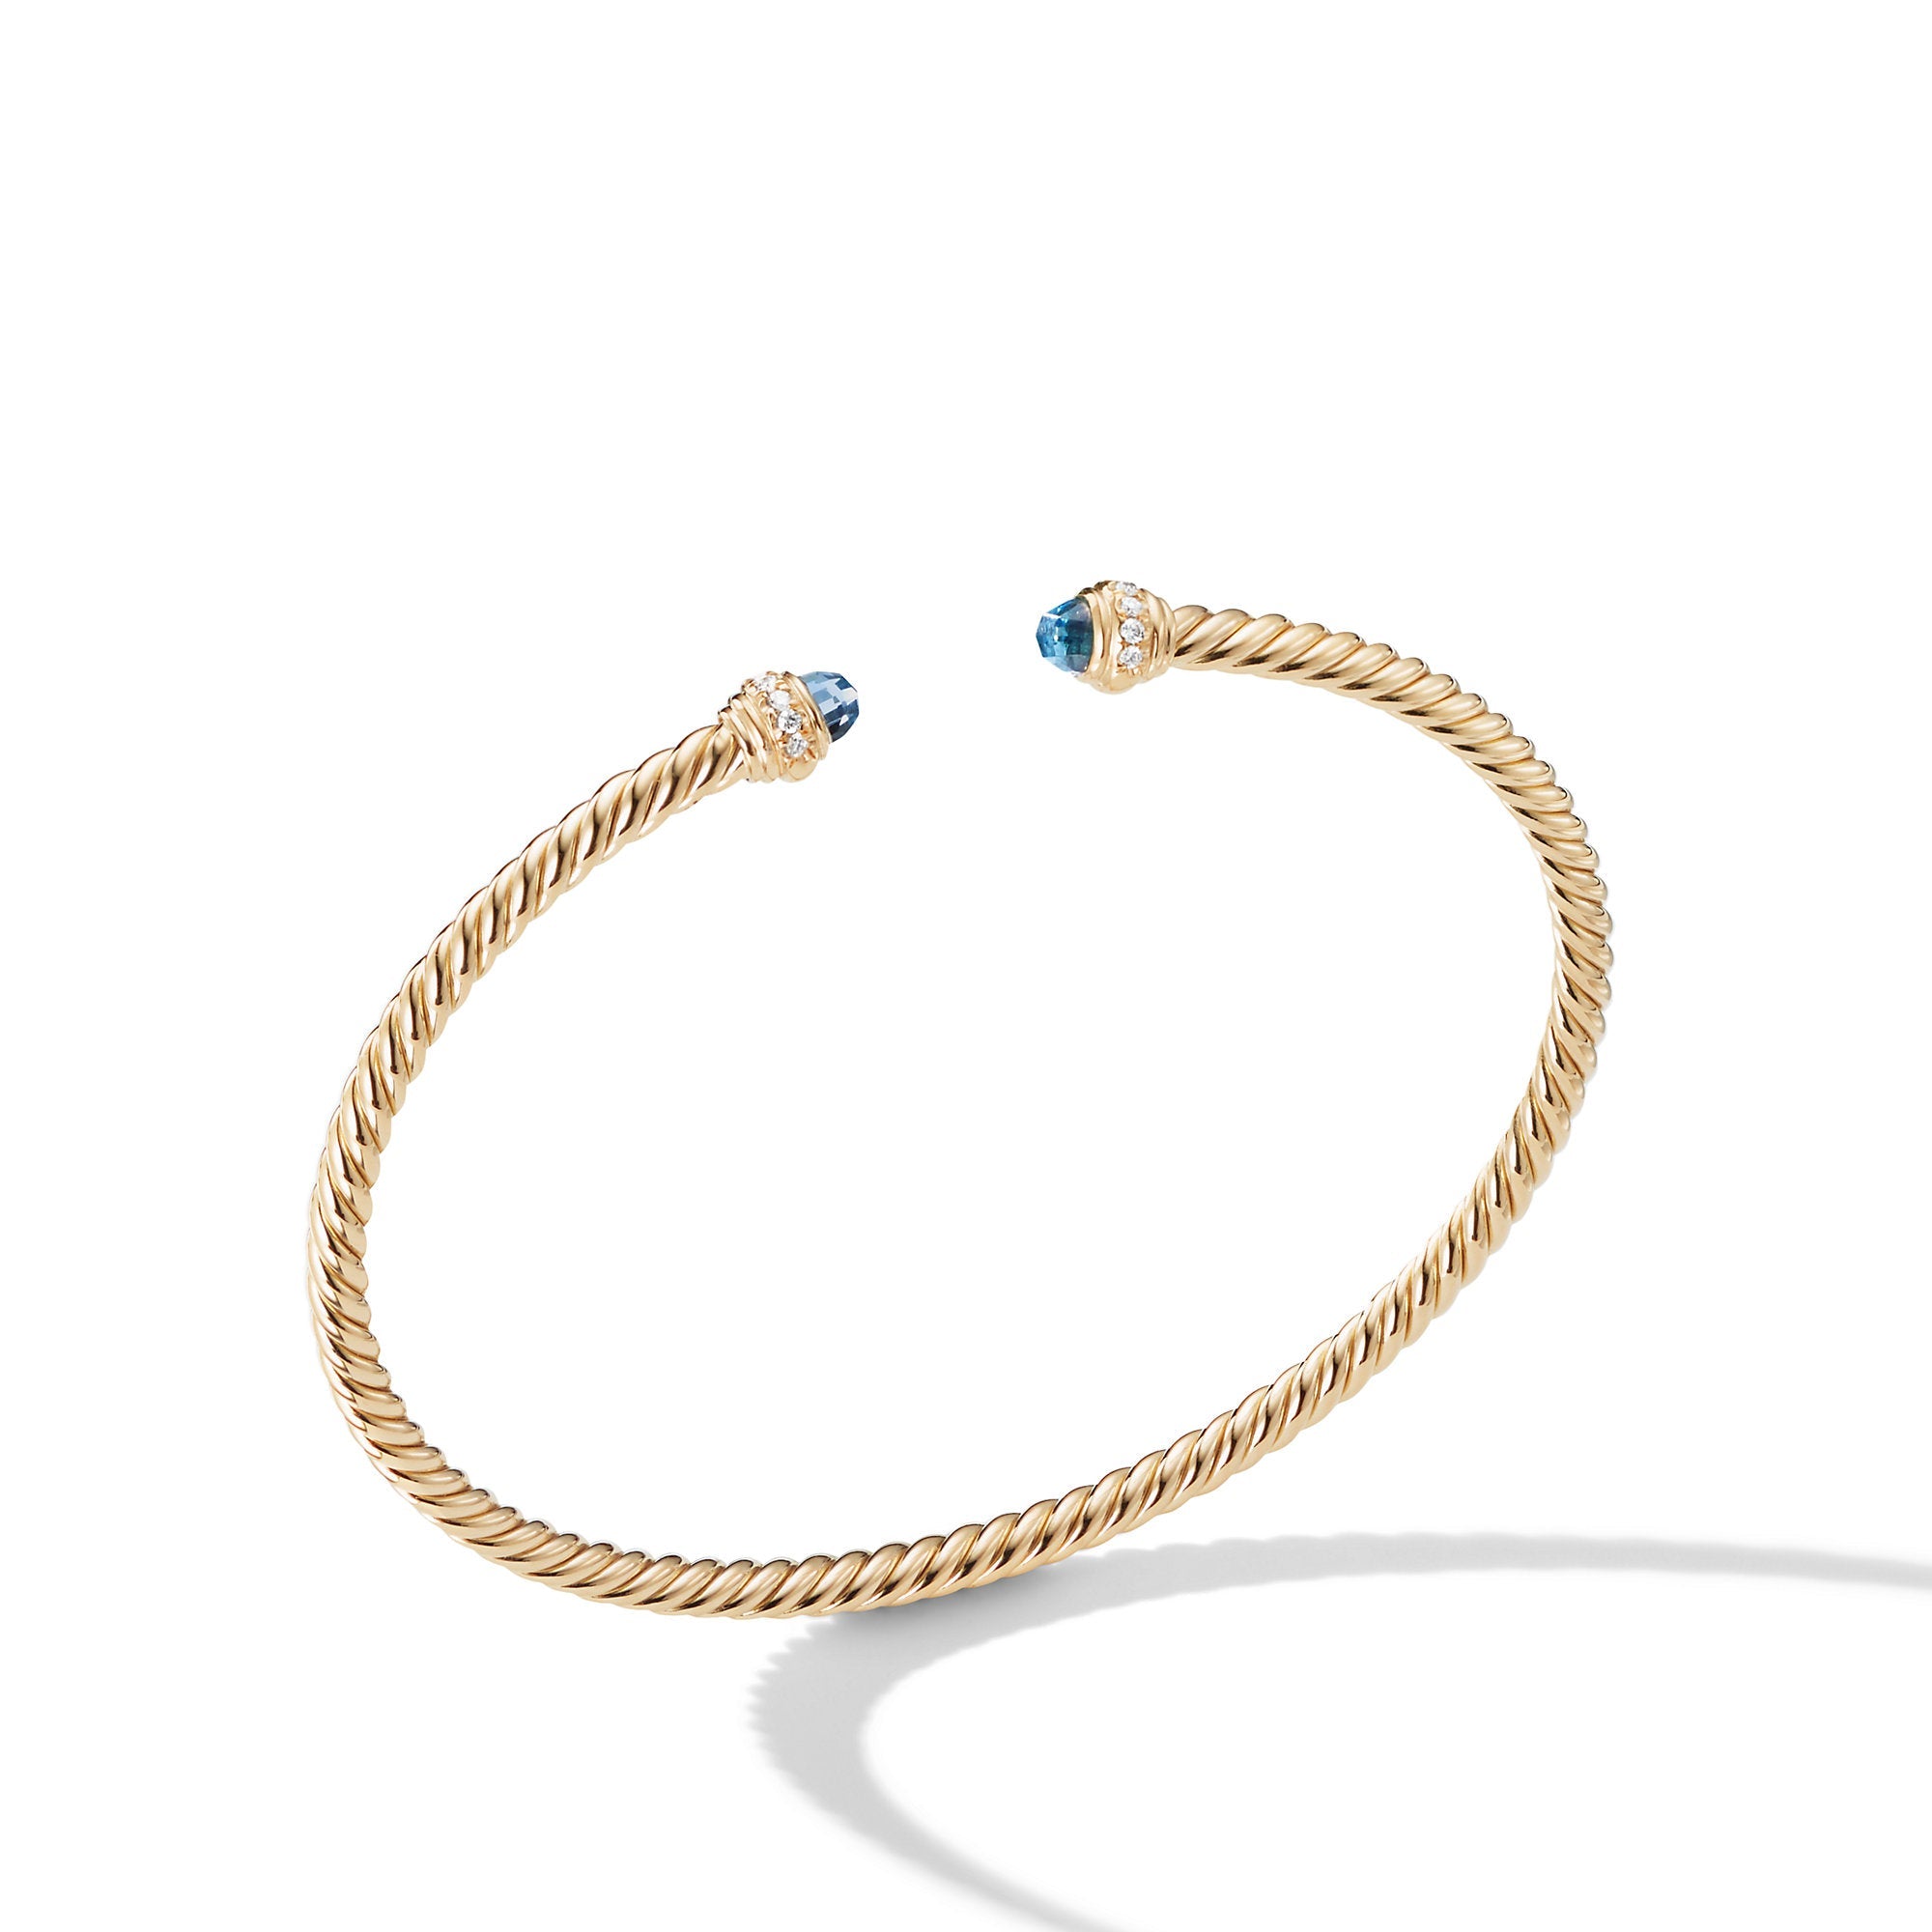 Cablespira® Bracelet in 18ct Yellow Gold with Hampton Blue Topaz and Pavé Diamonds